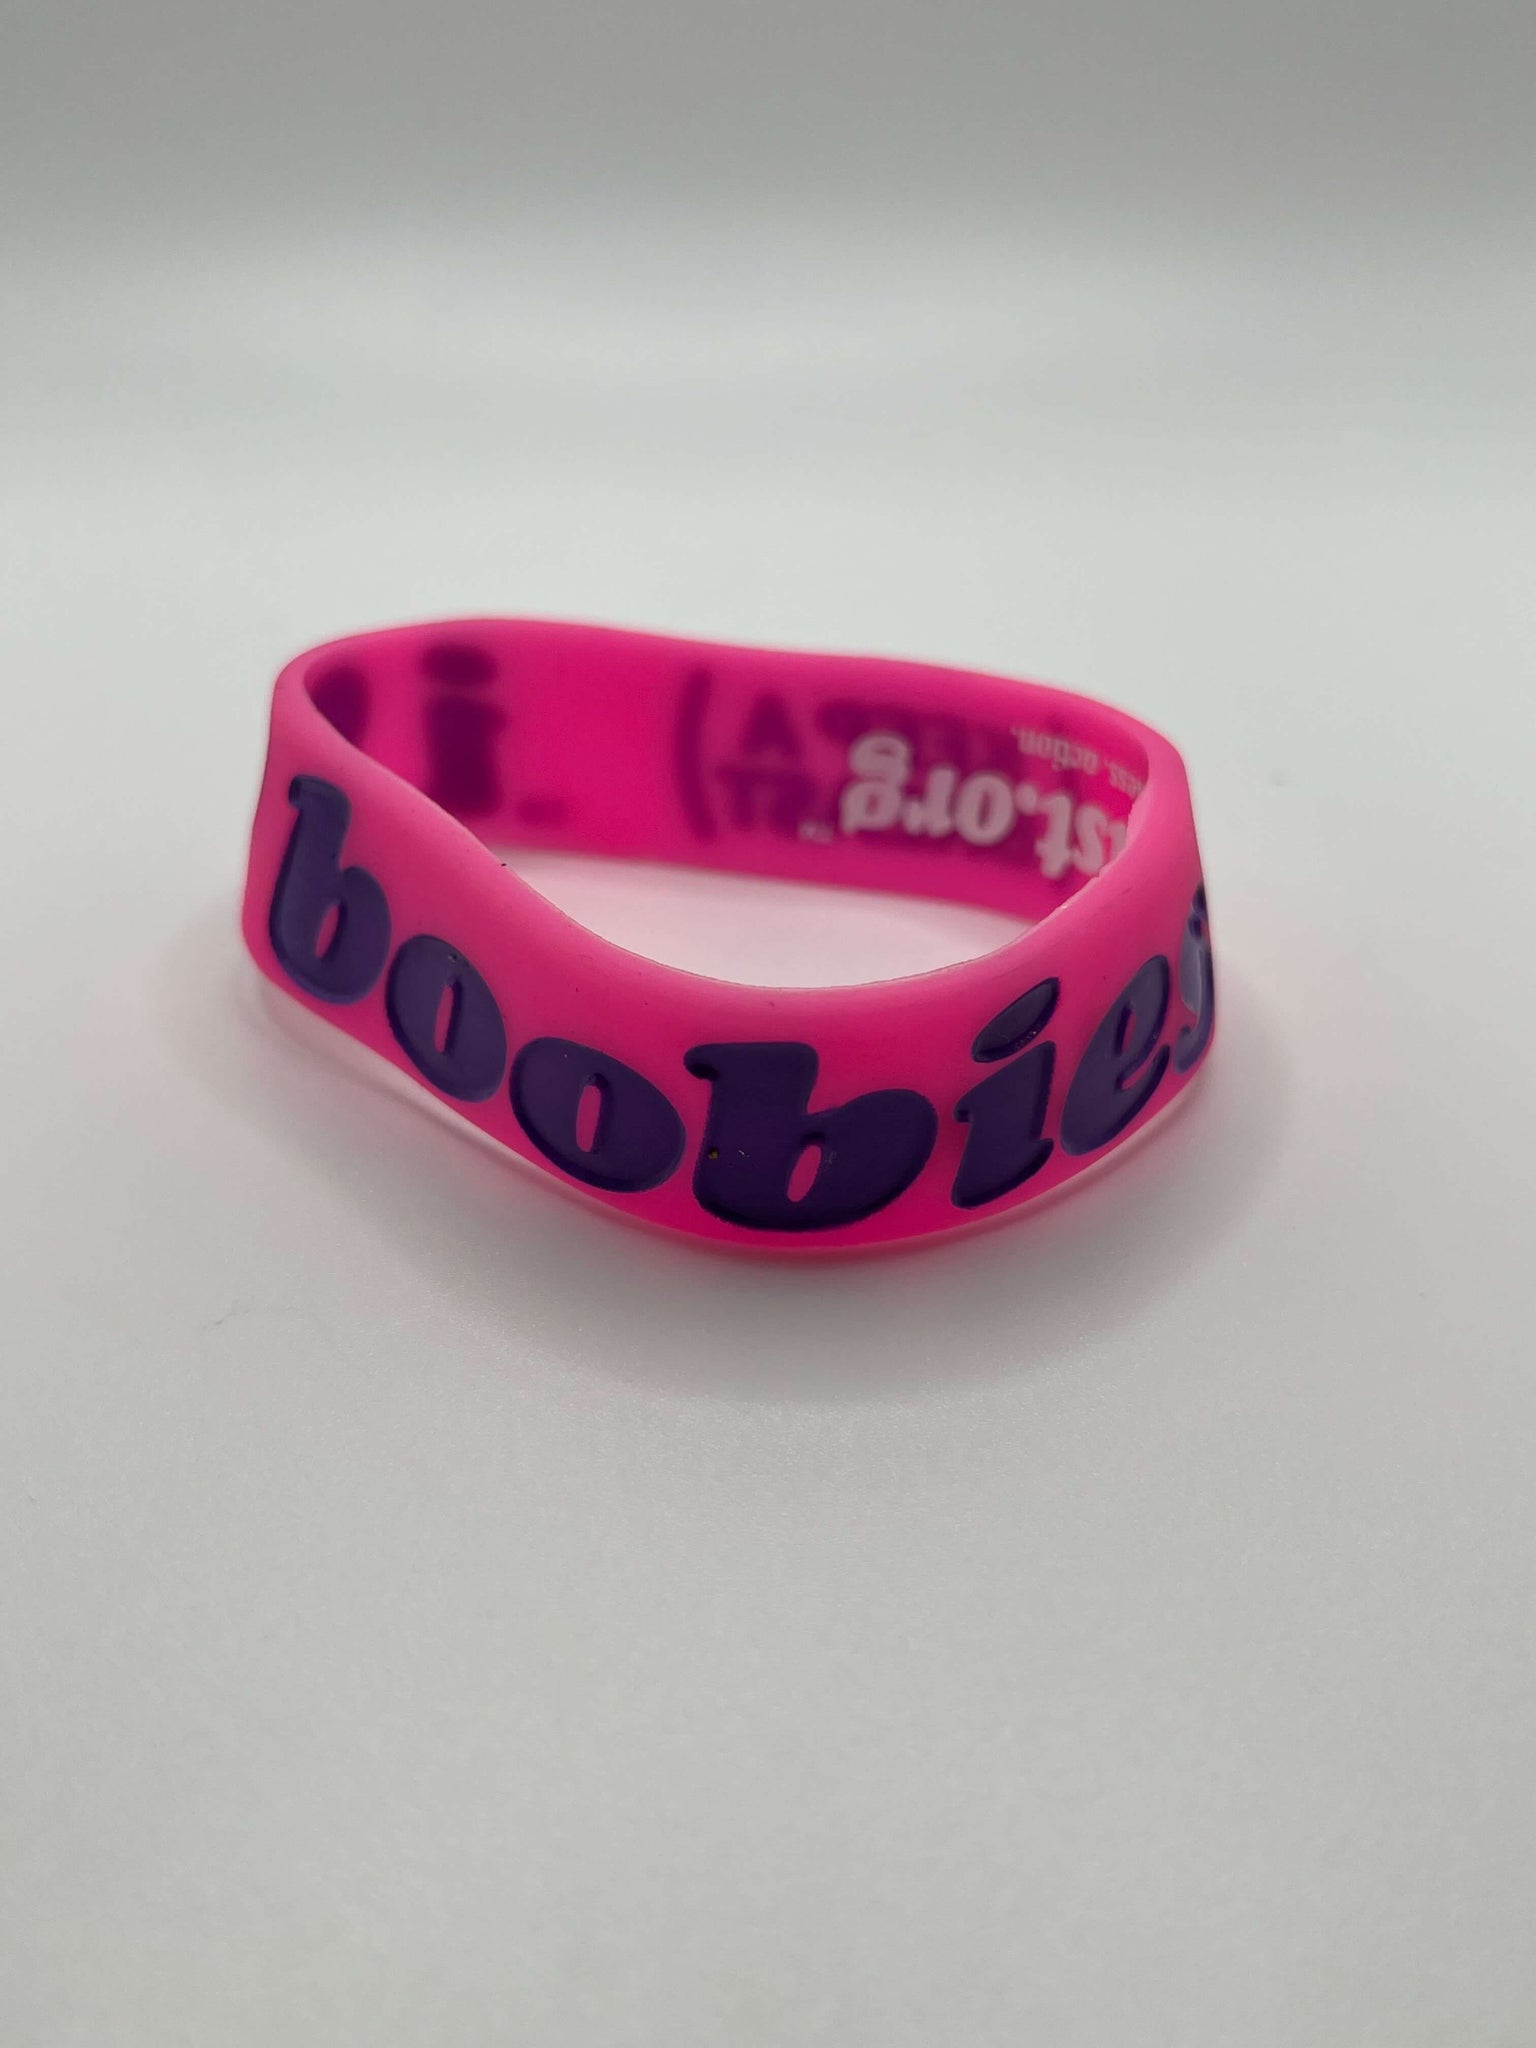 Keep A Breast Foundation - Wearing an i love boobies! bracelet or shirt  proclaims, “I love my boobies, and I choose to take care of them!” It is a  message about how